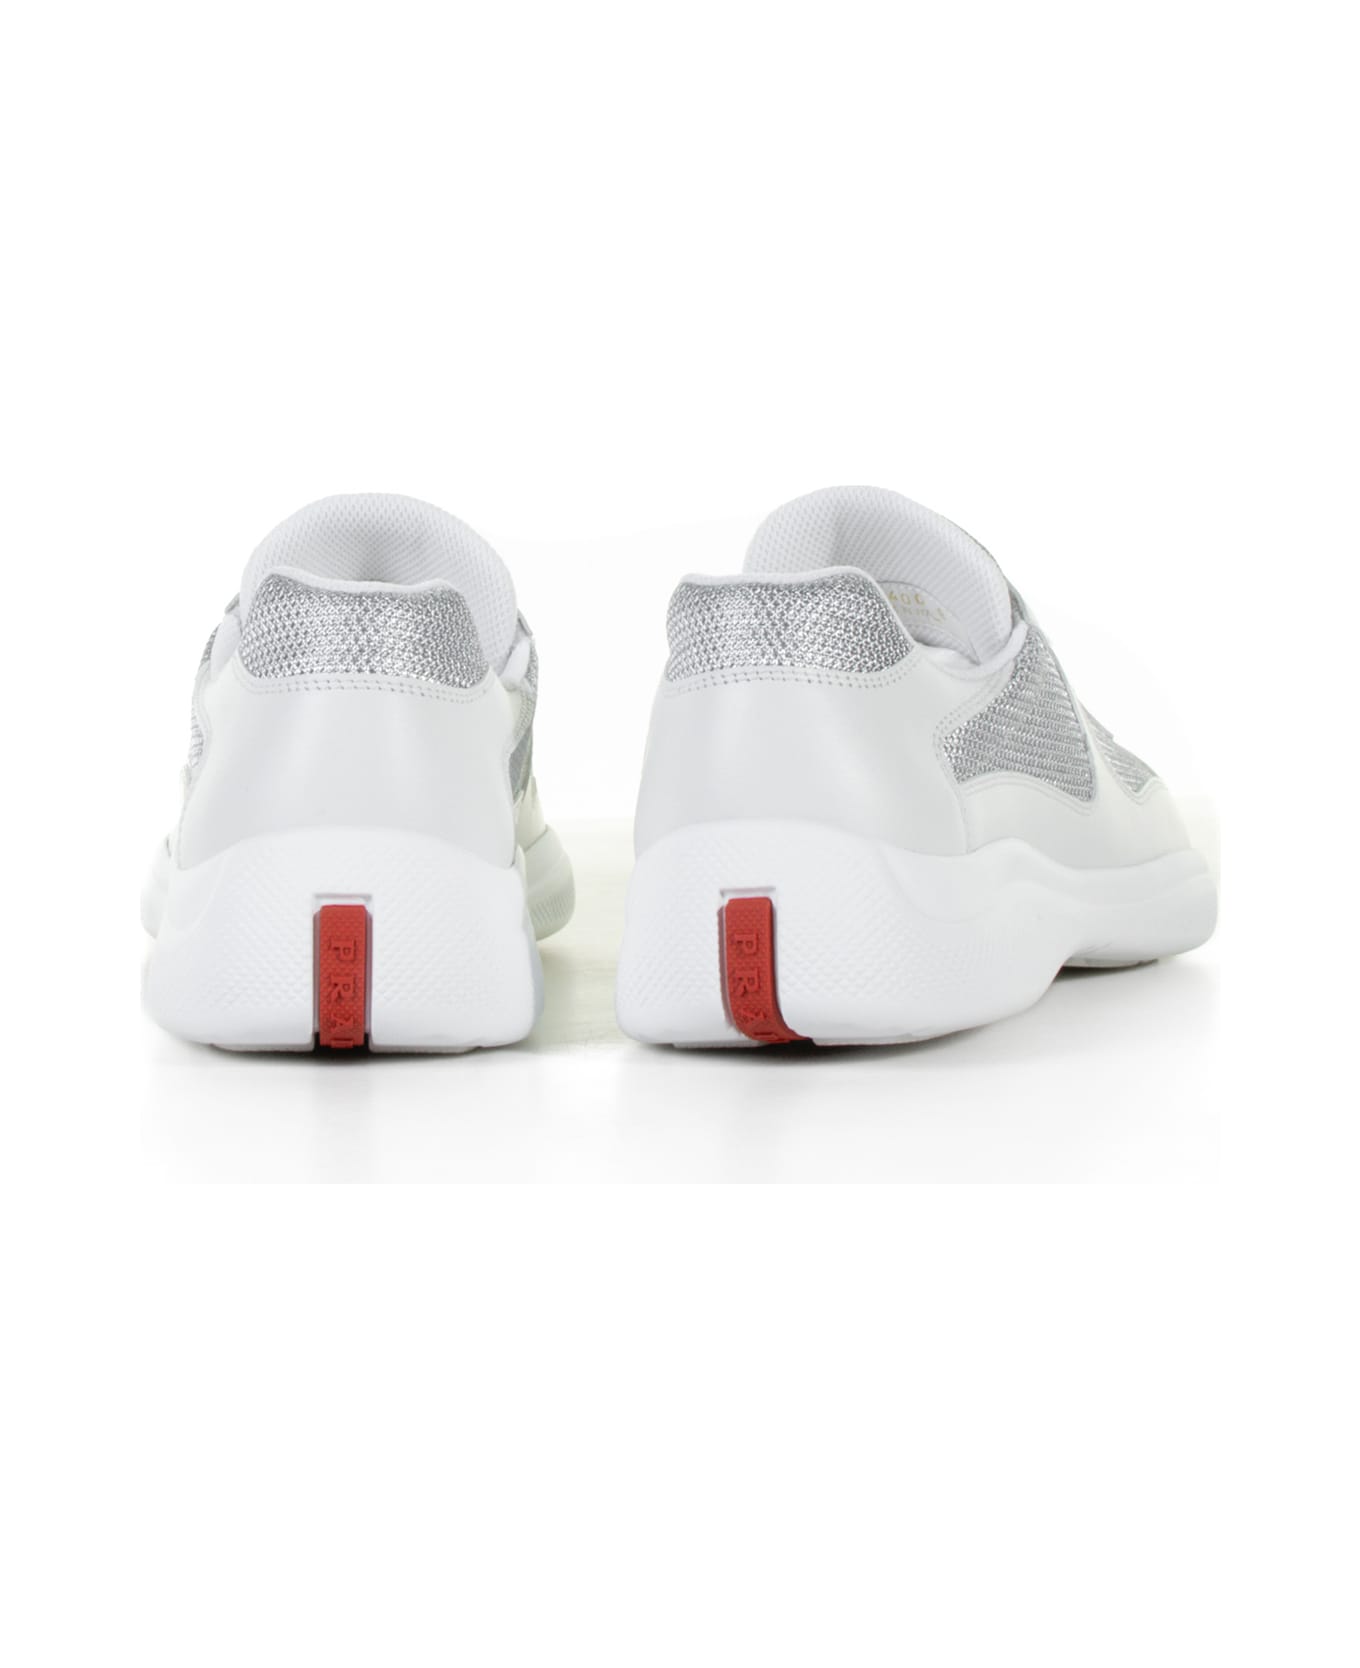 Prada America's Cup Sneakers With Linea Rossa Logo - Bianco/argento スニーカー